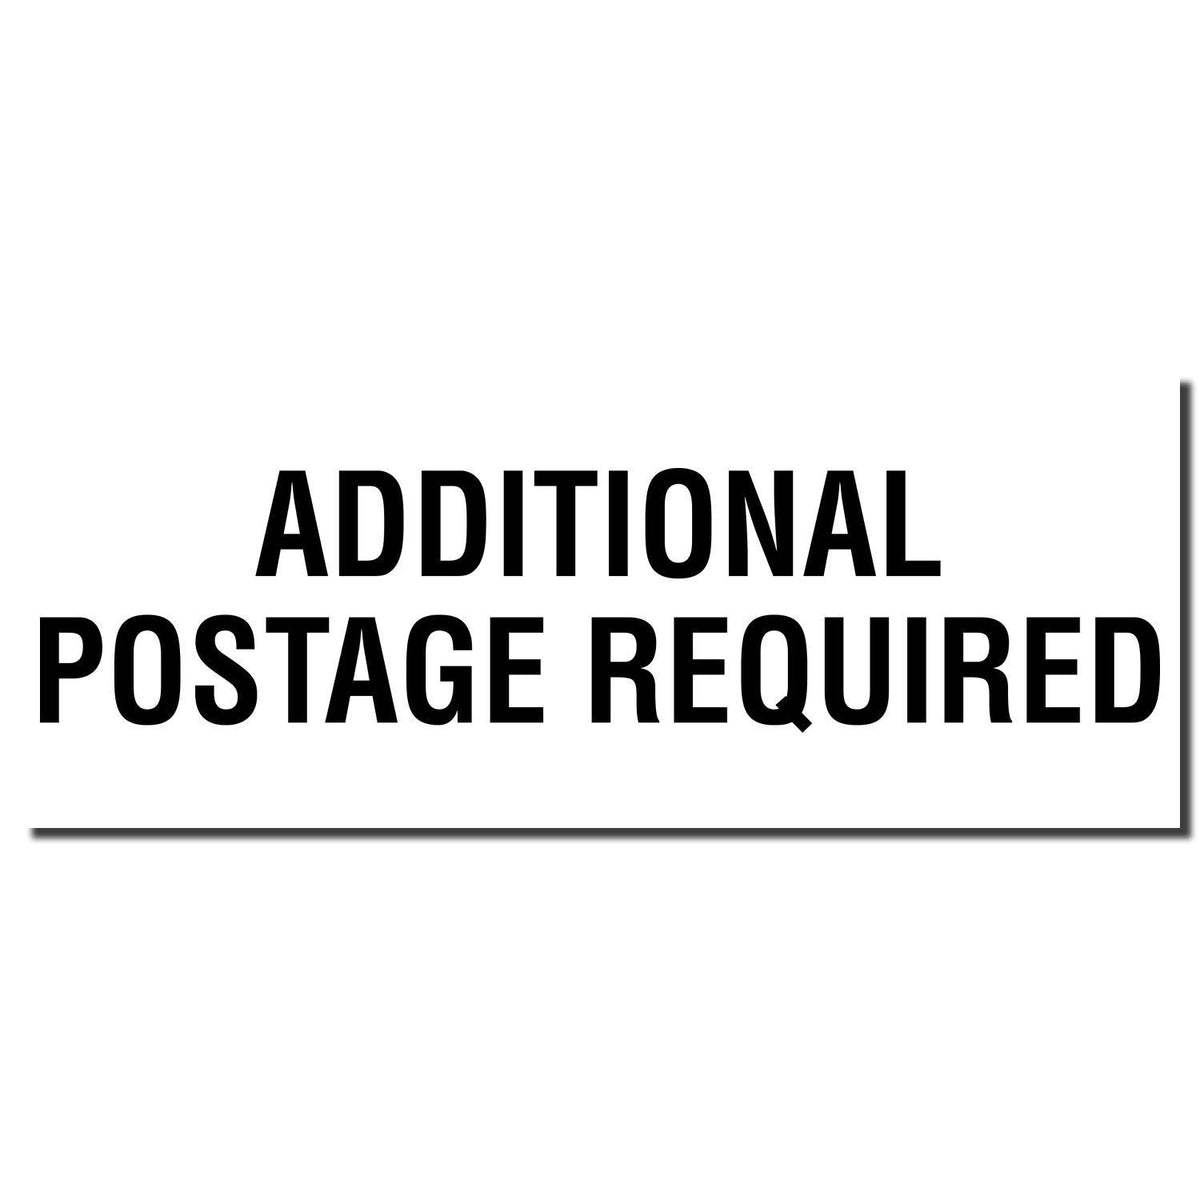 Enlarged Imprint Additional Postage Required Rubber Stamp Sample